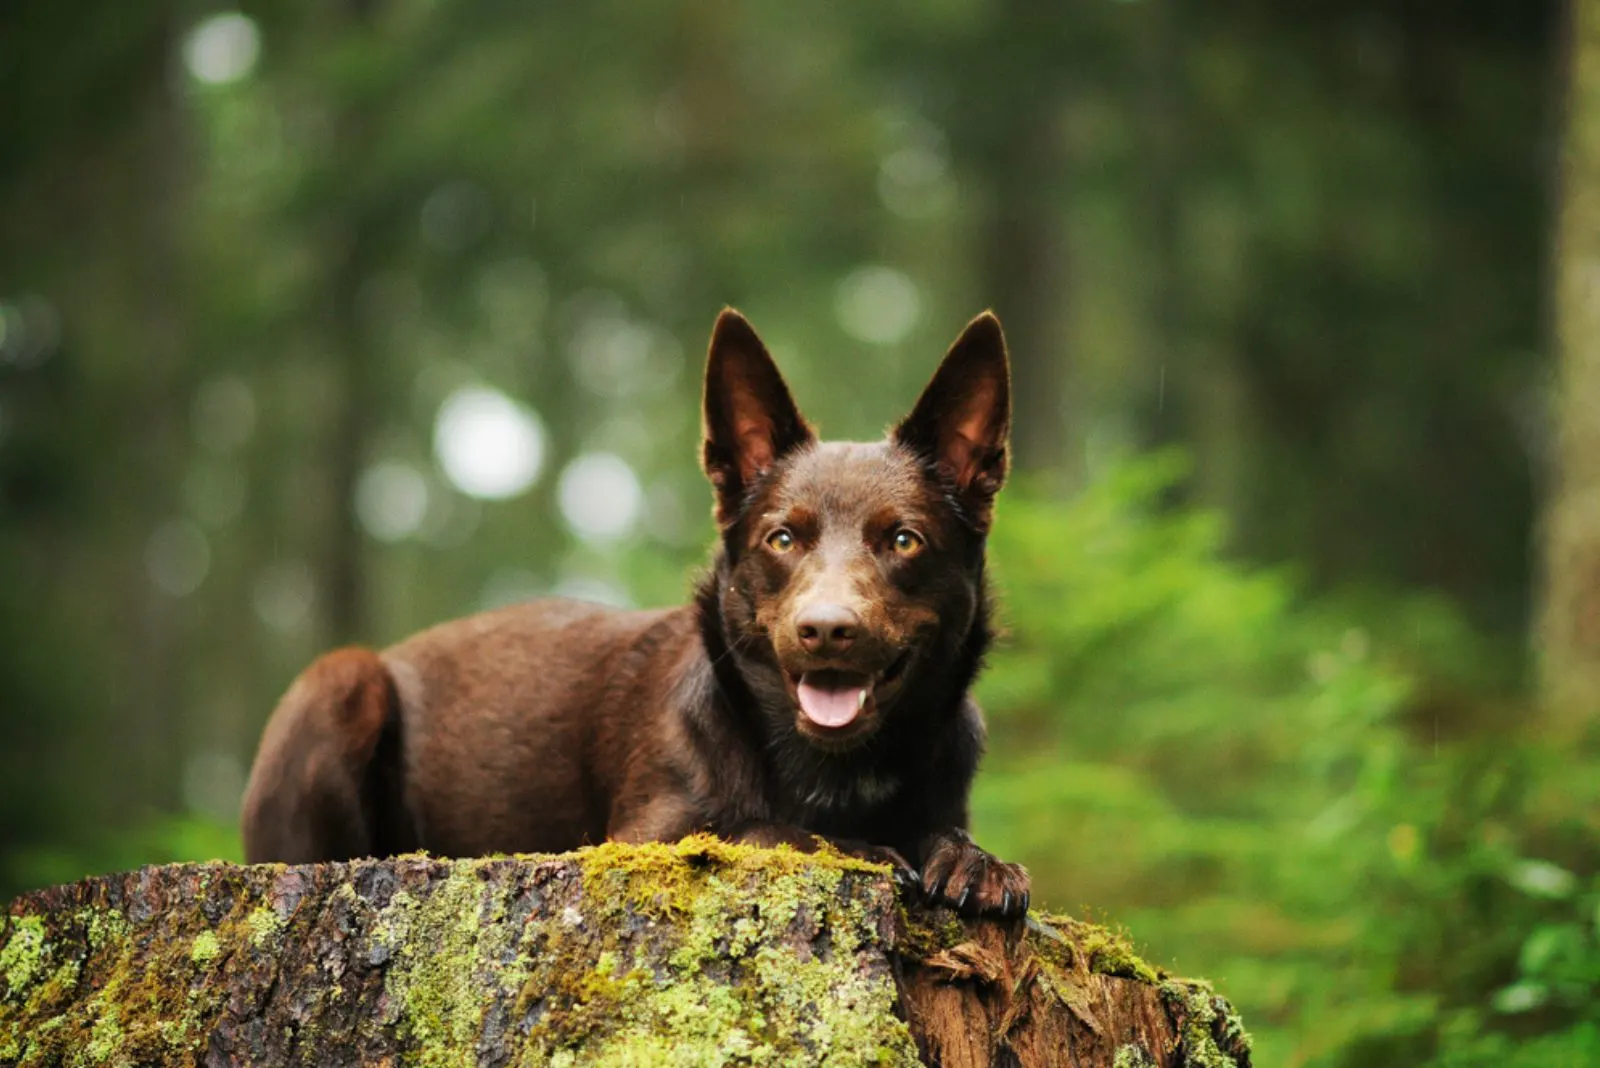 Australian kelpie in the forest during the rain